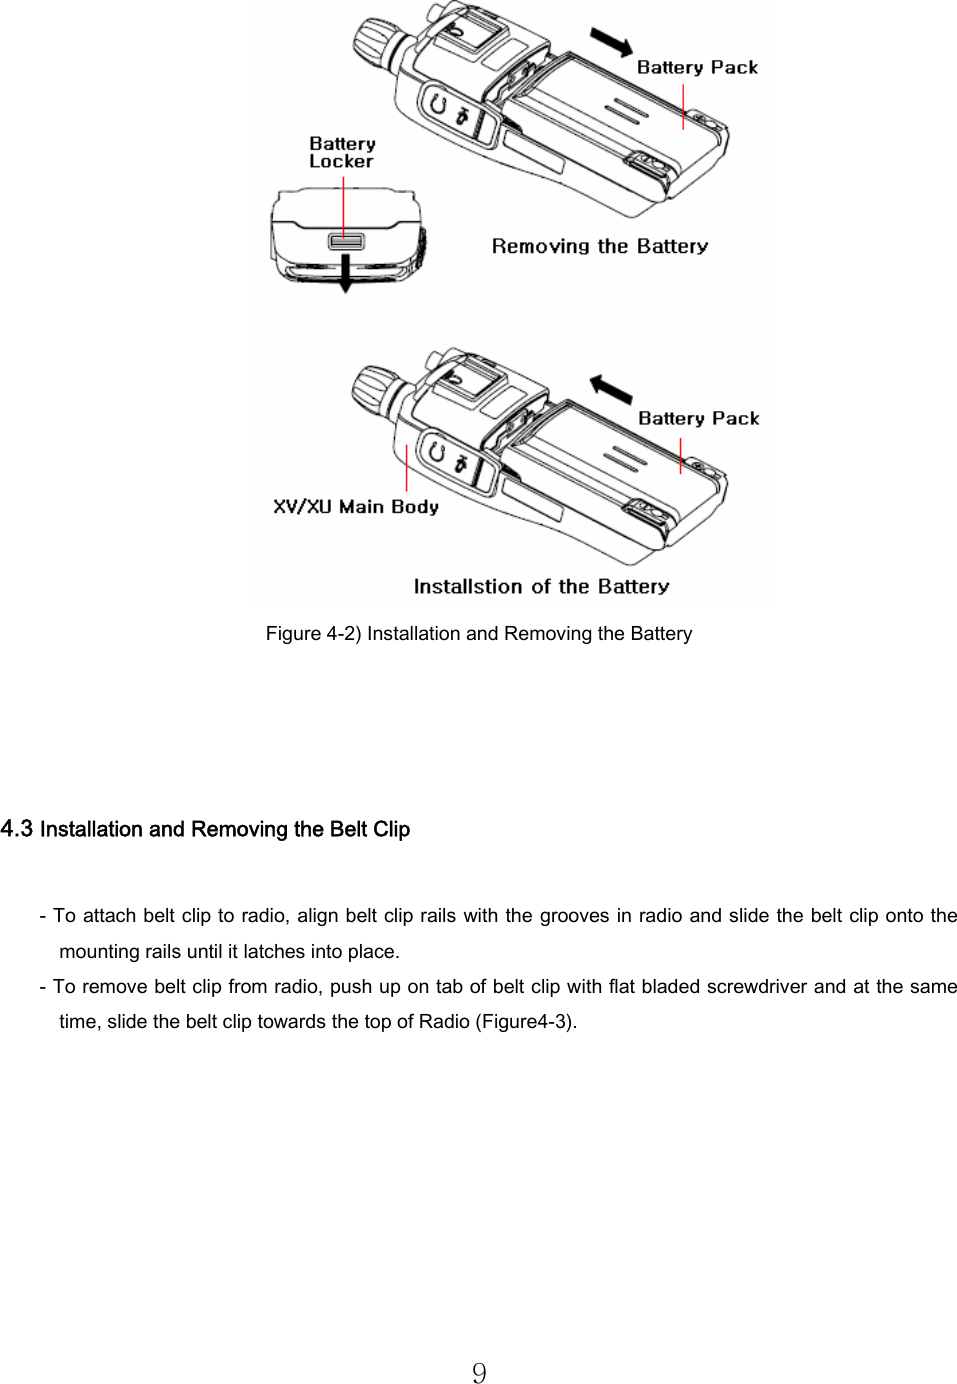 9  Figure 4-2) Installation and Removing the Battery   4.3 Installation and Removing the Belt Clip  - To attach belt clip to radio, align belt clip rails with the  grooves in radio and slide the belt clip onto the mounting rails until it latches into place. - To remove belt clip from radio, push up on tab of belt clip with flat bladed screwdriver and at the same time, slide the belt clip towards the top of Radio (Figure4-3).  